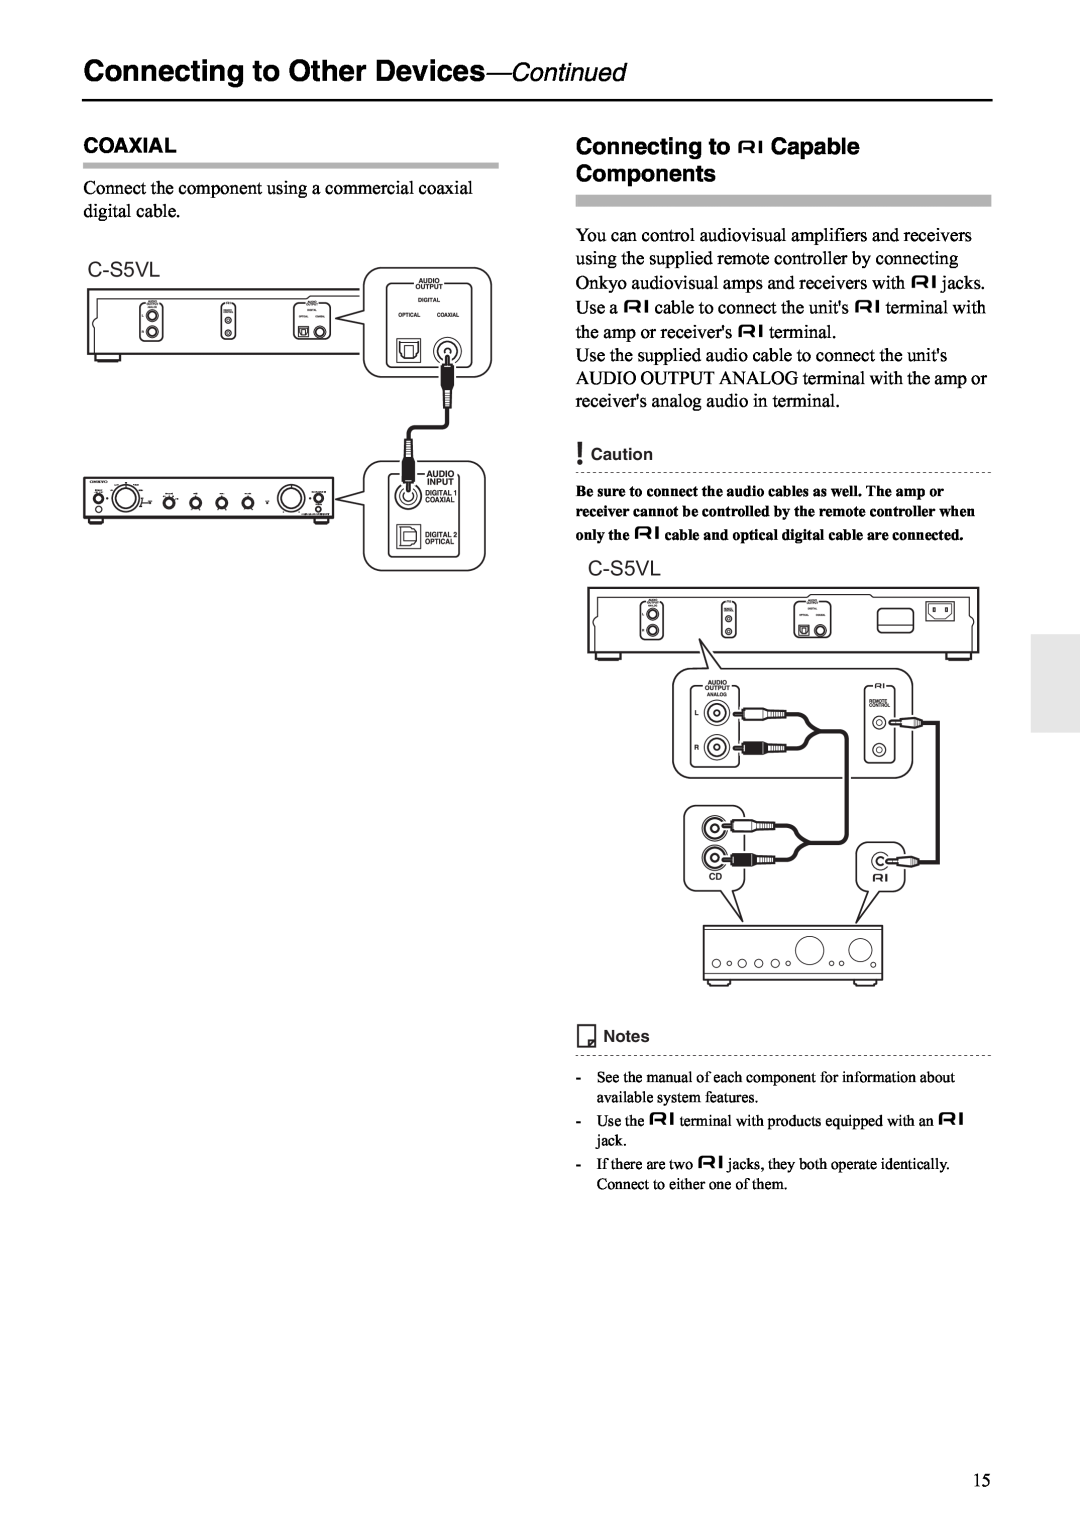 Onkyo C-S5VL instruction manual Connecting to Other Devices-Continued, Connecting to Capable Components, Coaxial 